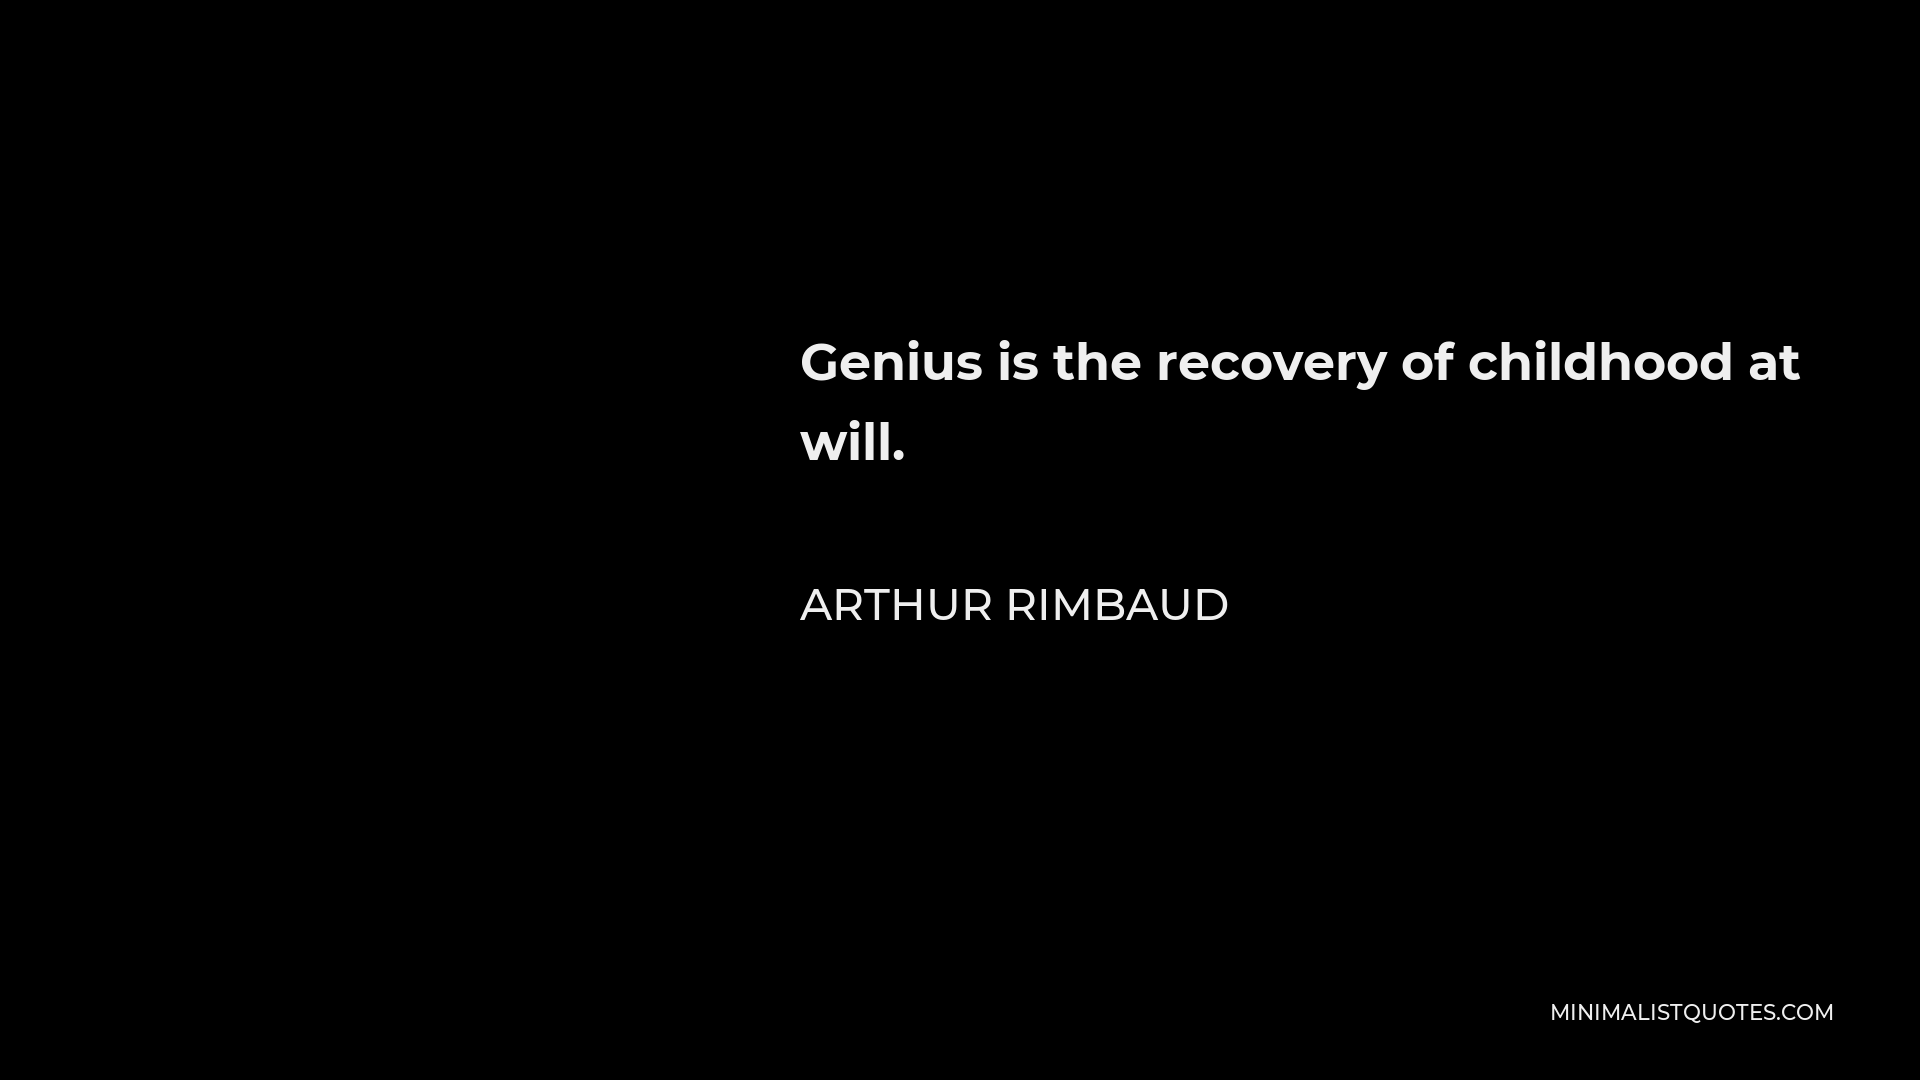 Arthur Rimbaud Quote - Genius is the recovery of childhood at will.